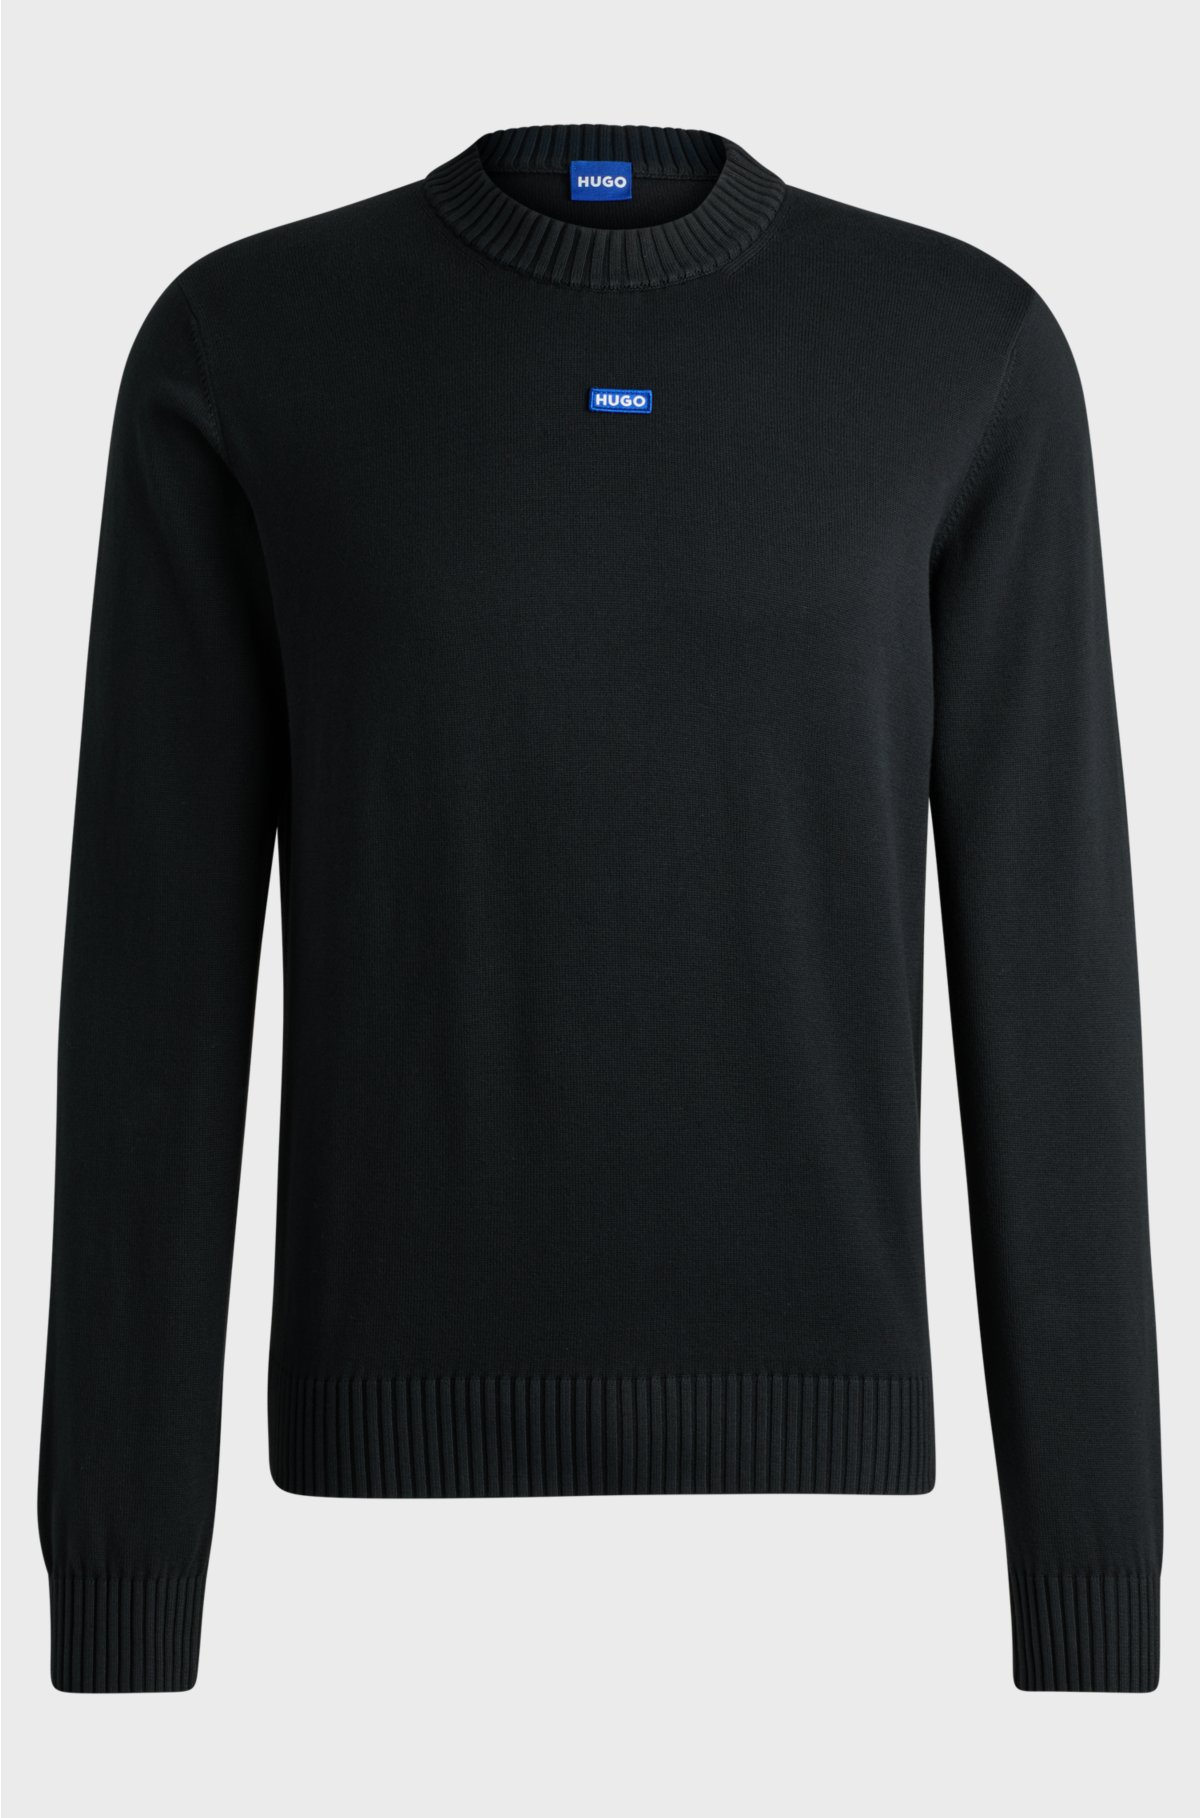 Knitted-cotton sweater with blue logo label, Black